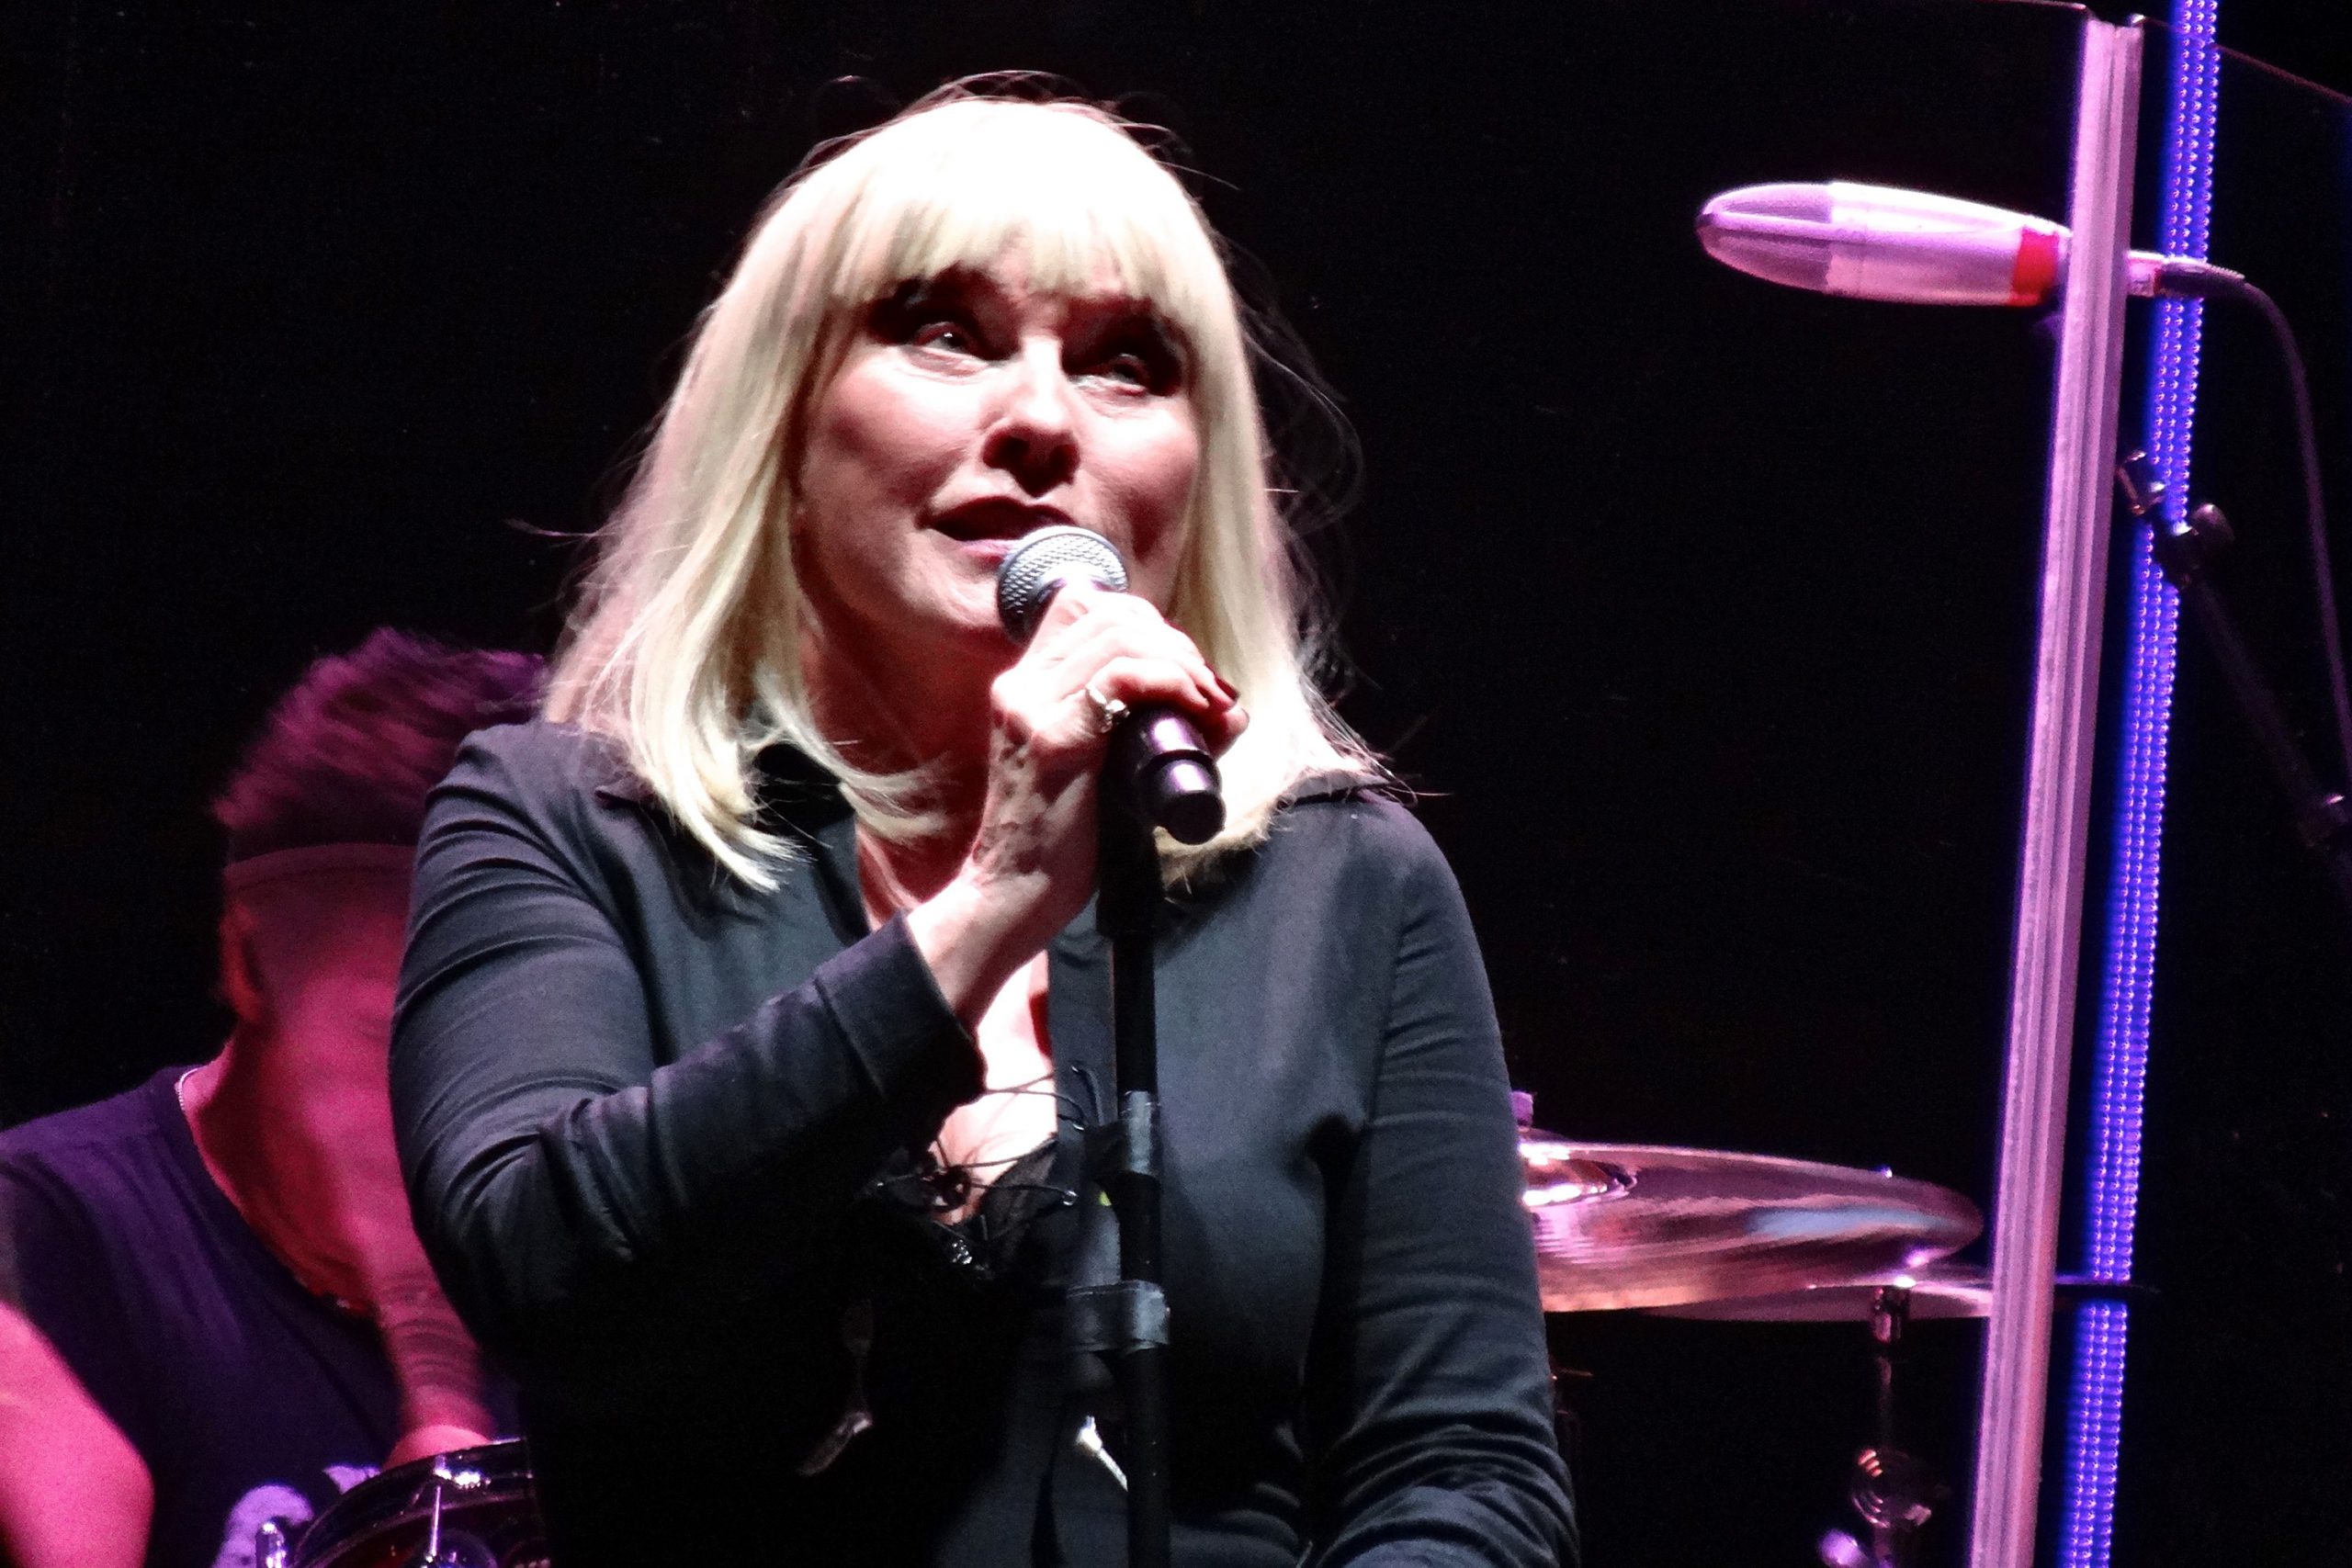 You Can’t Stop Rock ‘n’ Roll: Blondie delivers to critics with “Eat to the Beat”